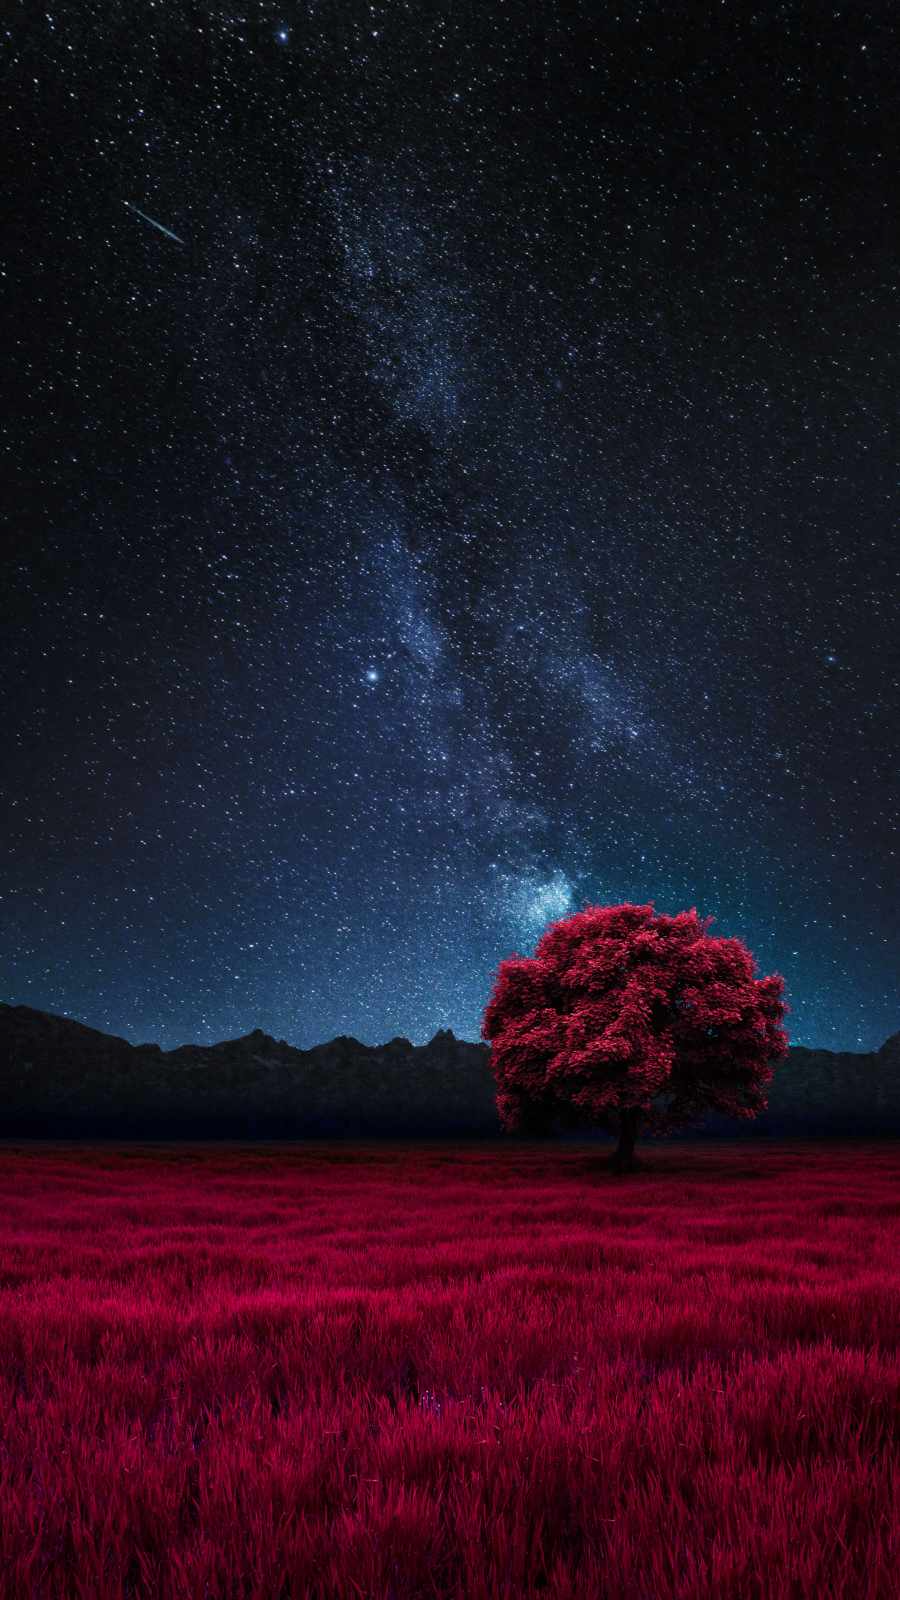 The Red Tree IPhone Wallpaper  IPhone Wallpapers